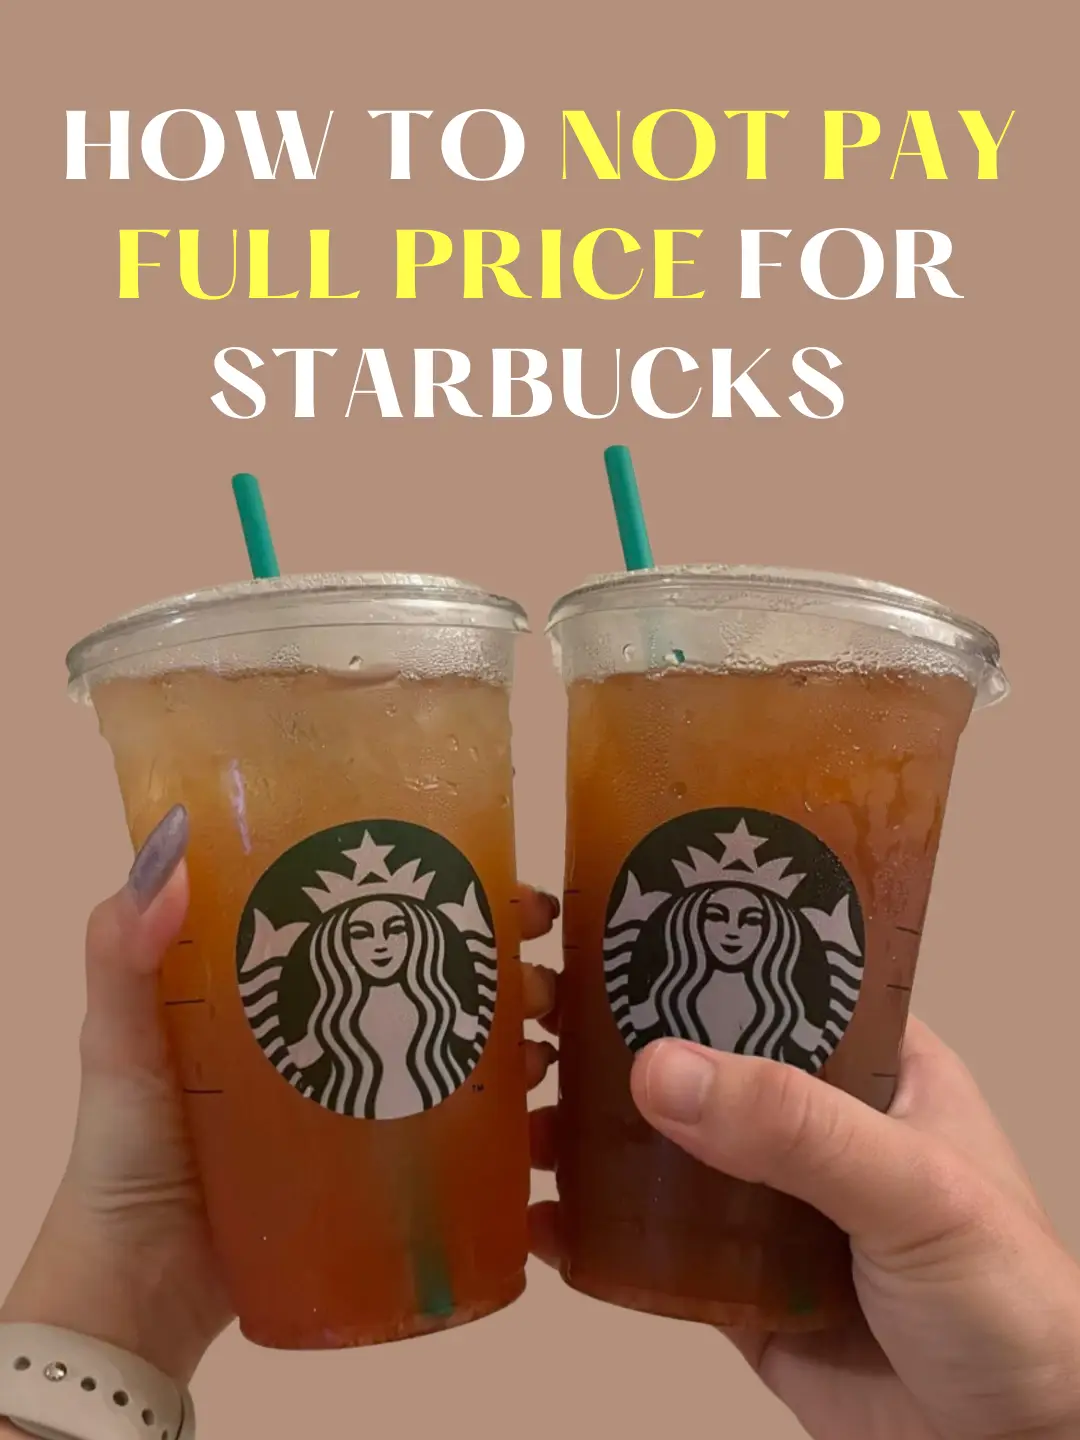 the ultimate starbucks hack 🤫's images